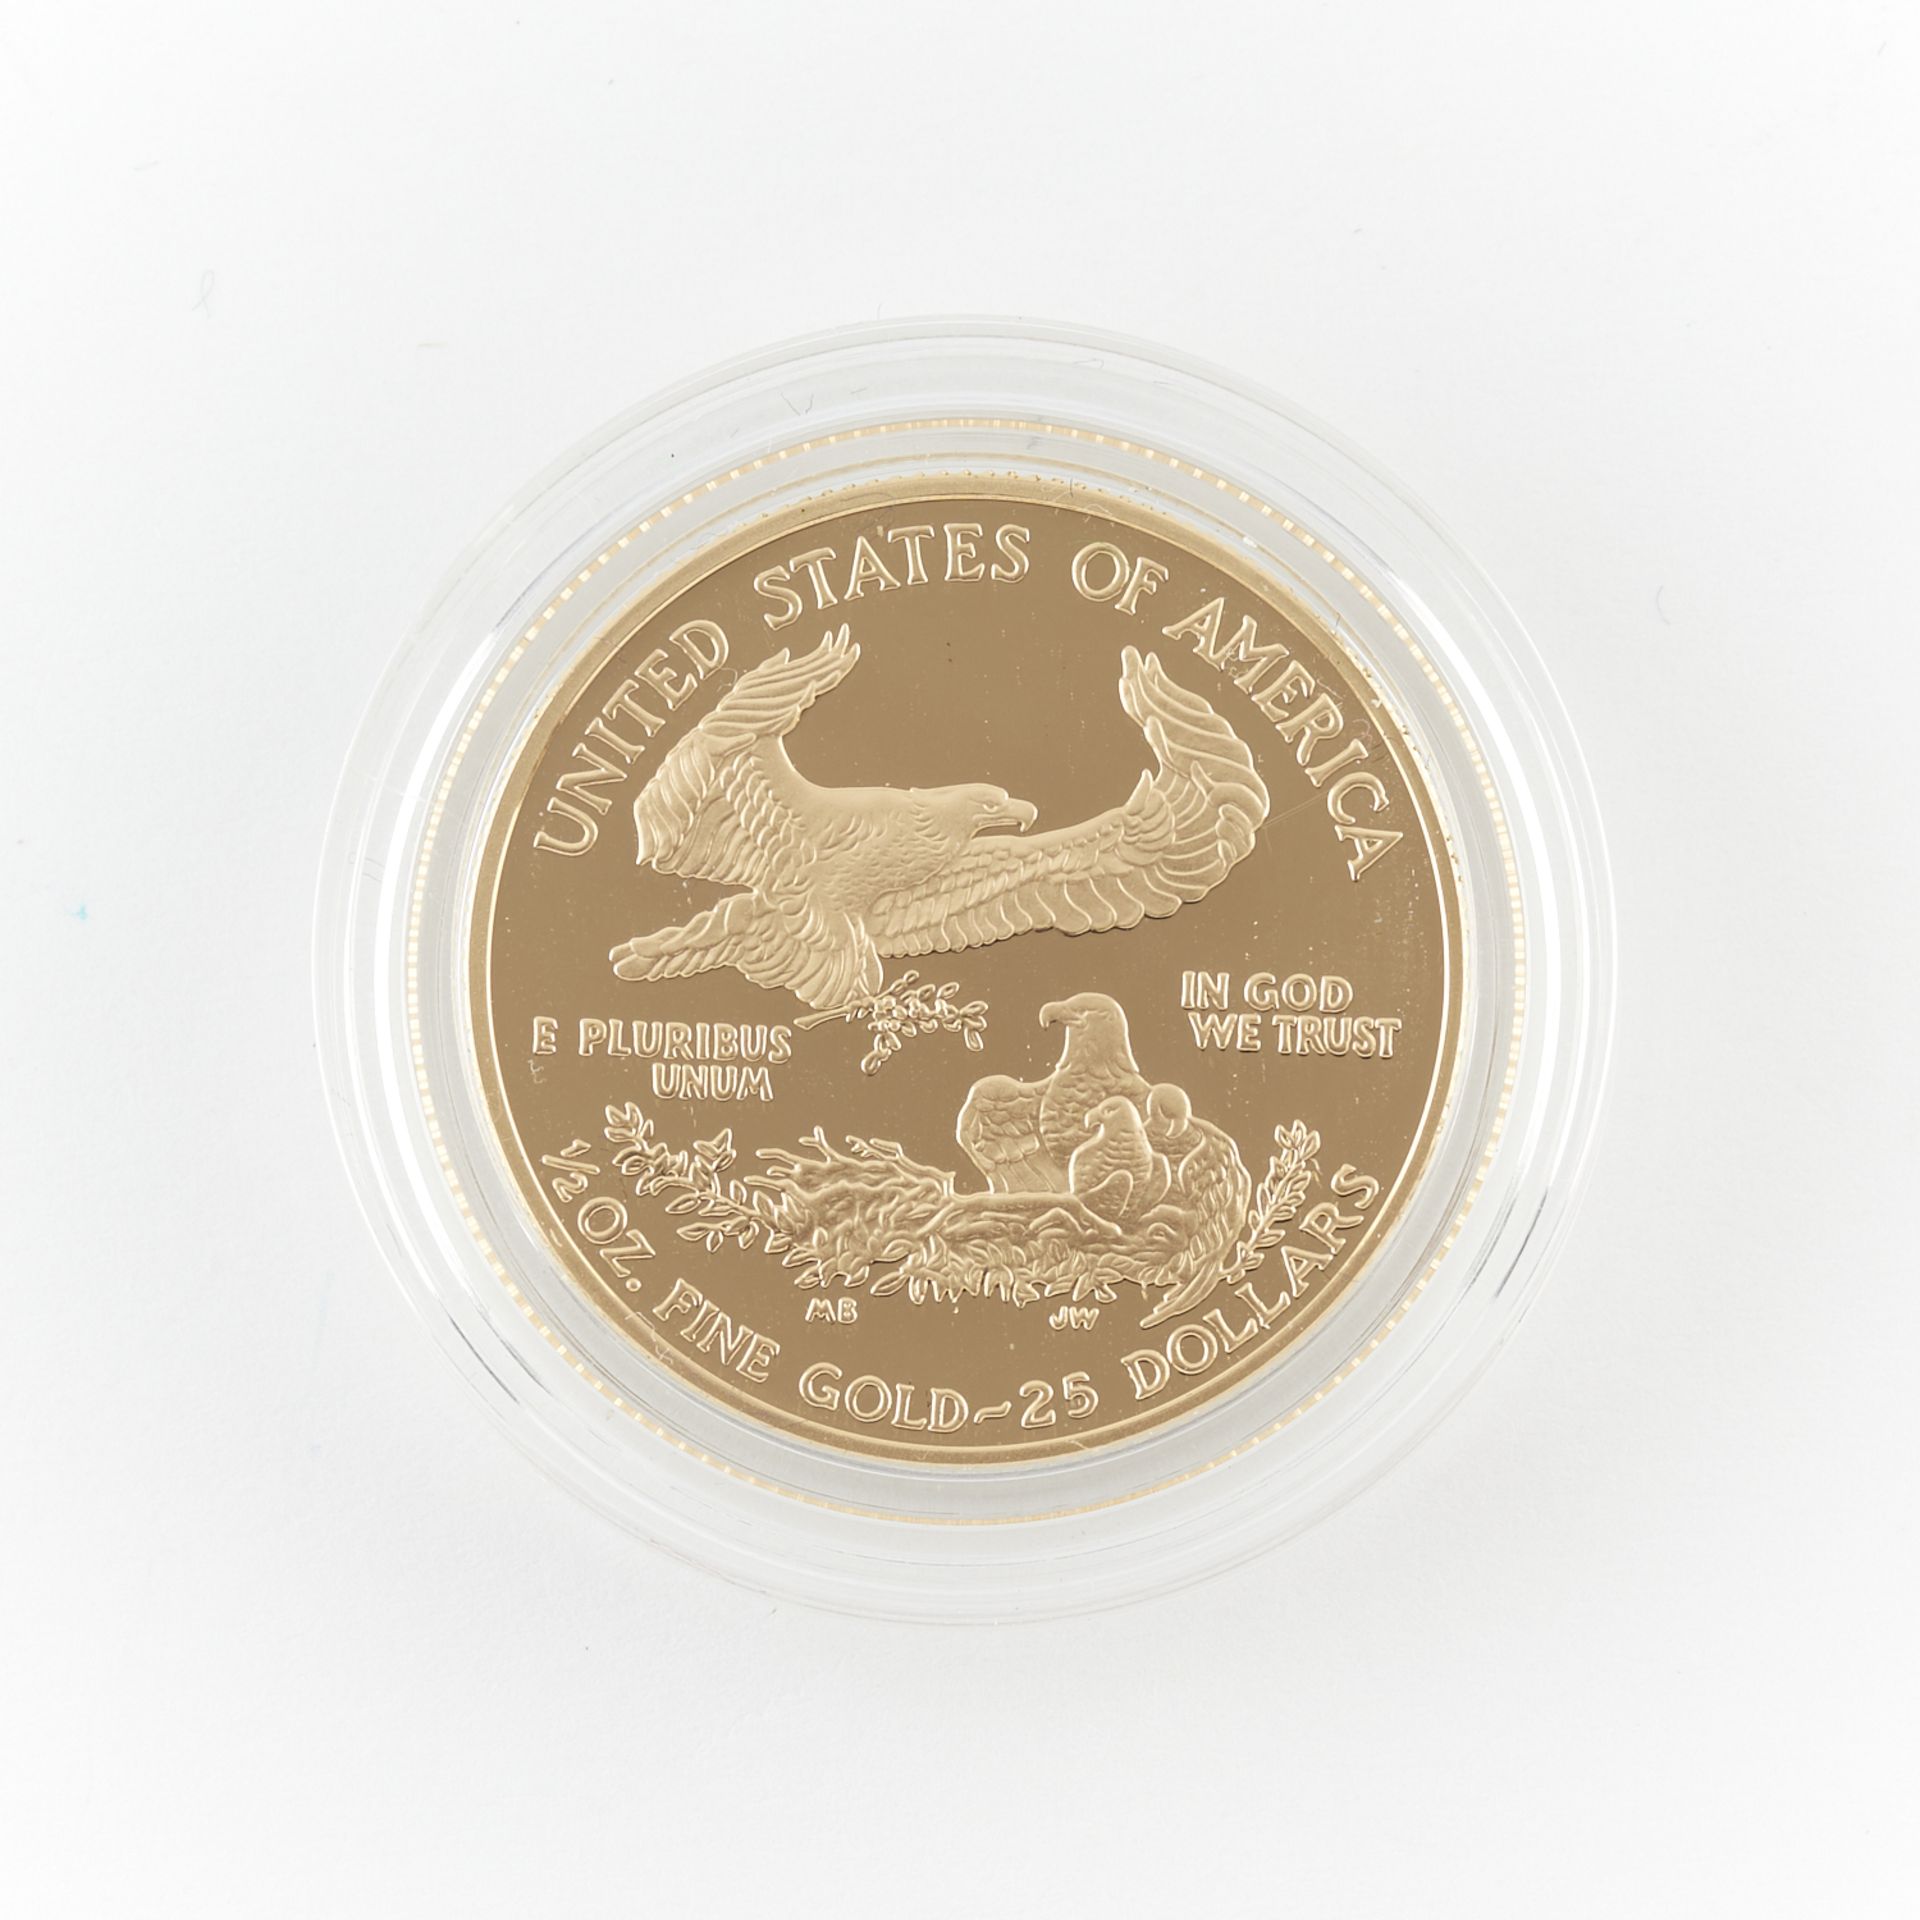 2003 $25 Gold American Eagle Proof Coin - Image 2 of 3